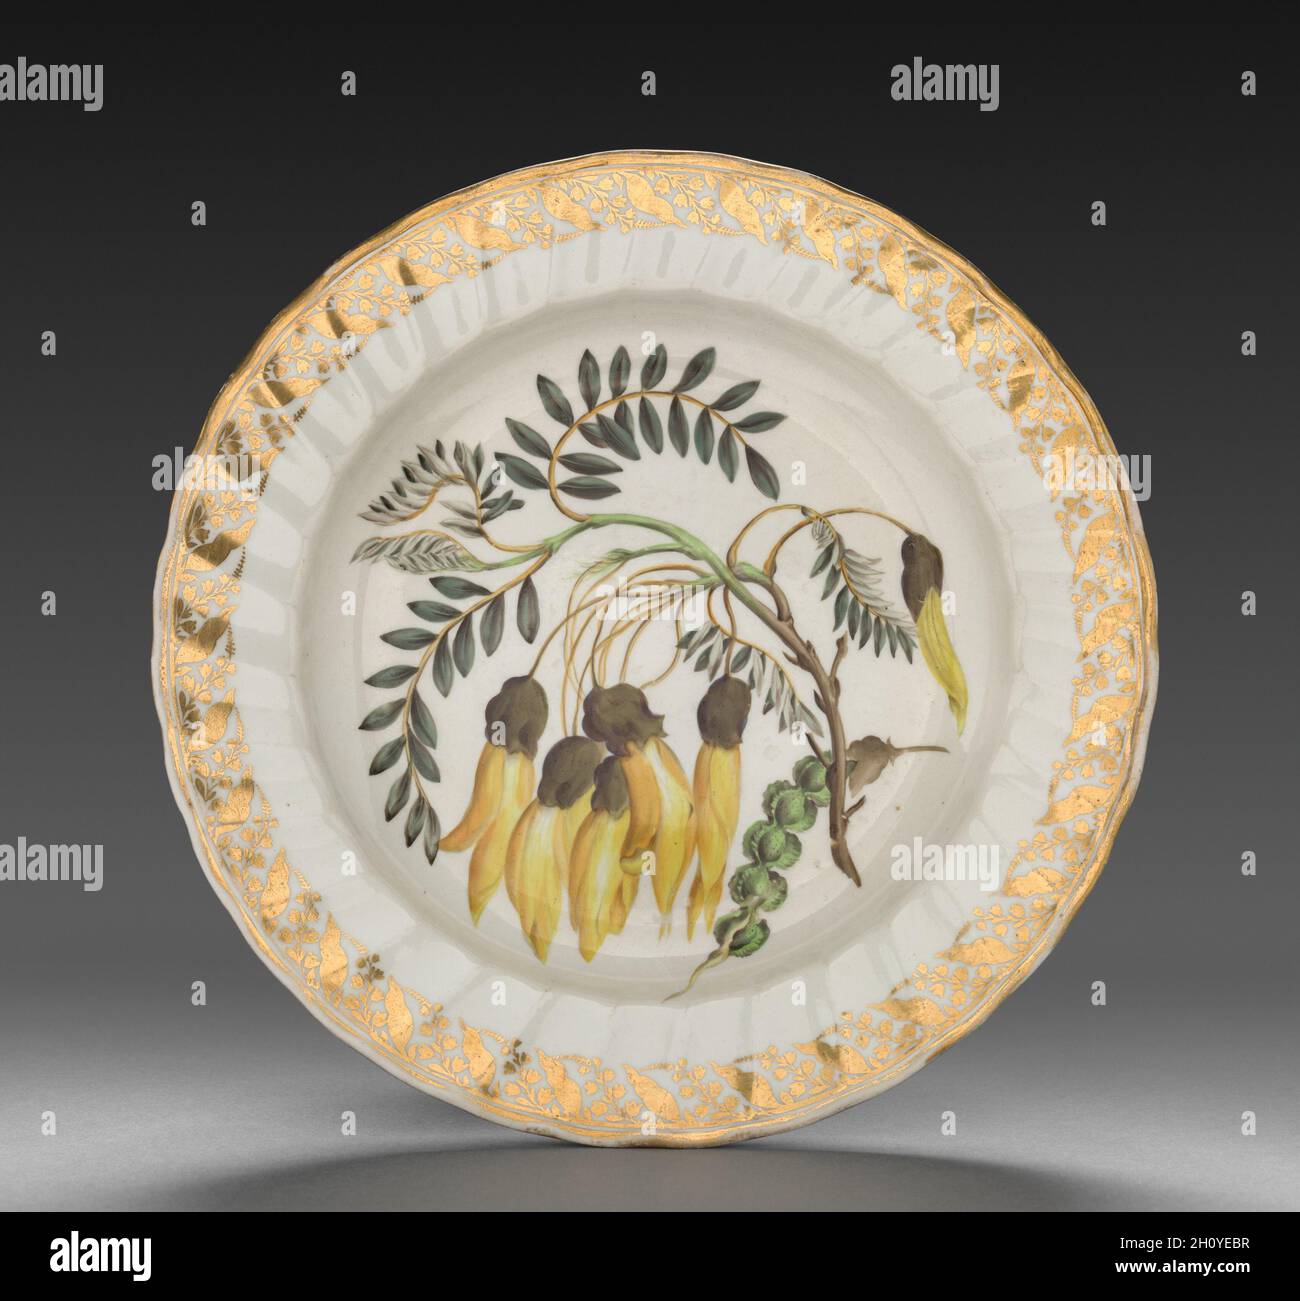 Plate from Dessert Service: Winged Podded Sophora, c. 1800. Derby (Crown Derby Period) (British). Porcelain; diameter: 23.5 cm (9 1/4 in.); overall: 3.1 cm (1 1/4 in.).  Each dish is decorated with recognizable plants, the names of which are inscribed on the base in both Latin and English. Identifying the blossoms only became customary in the late 18th century when a single piece of porcelain was decorated with one species, and flowers were represented along with leaves, stems, seed pods, and roots. All of this reflects Carolus Linnaeus’s recent invention of a scientific method to categorize a Stock Photo